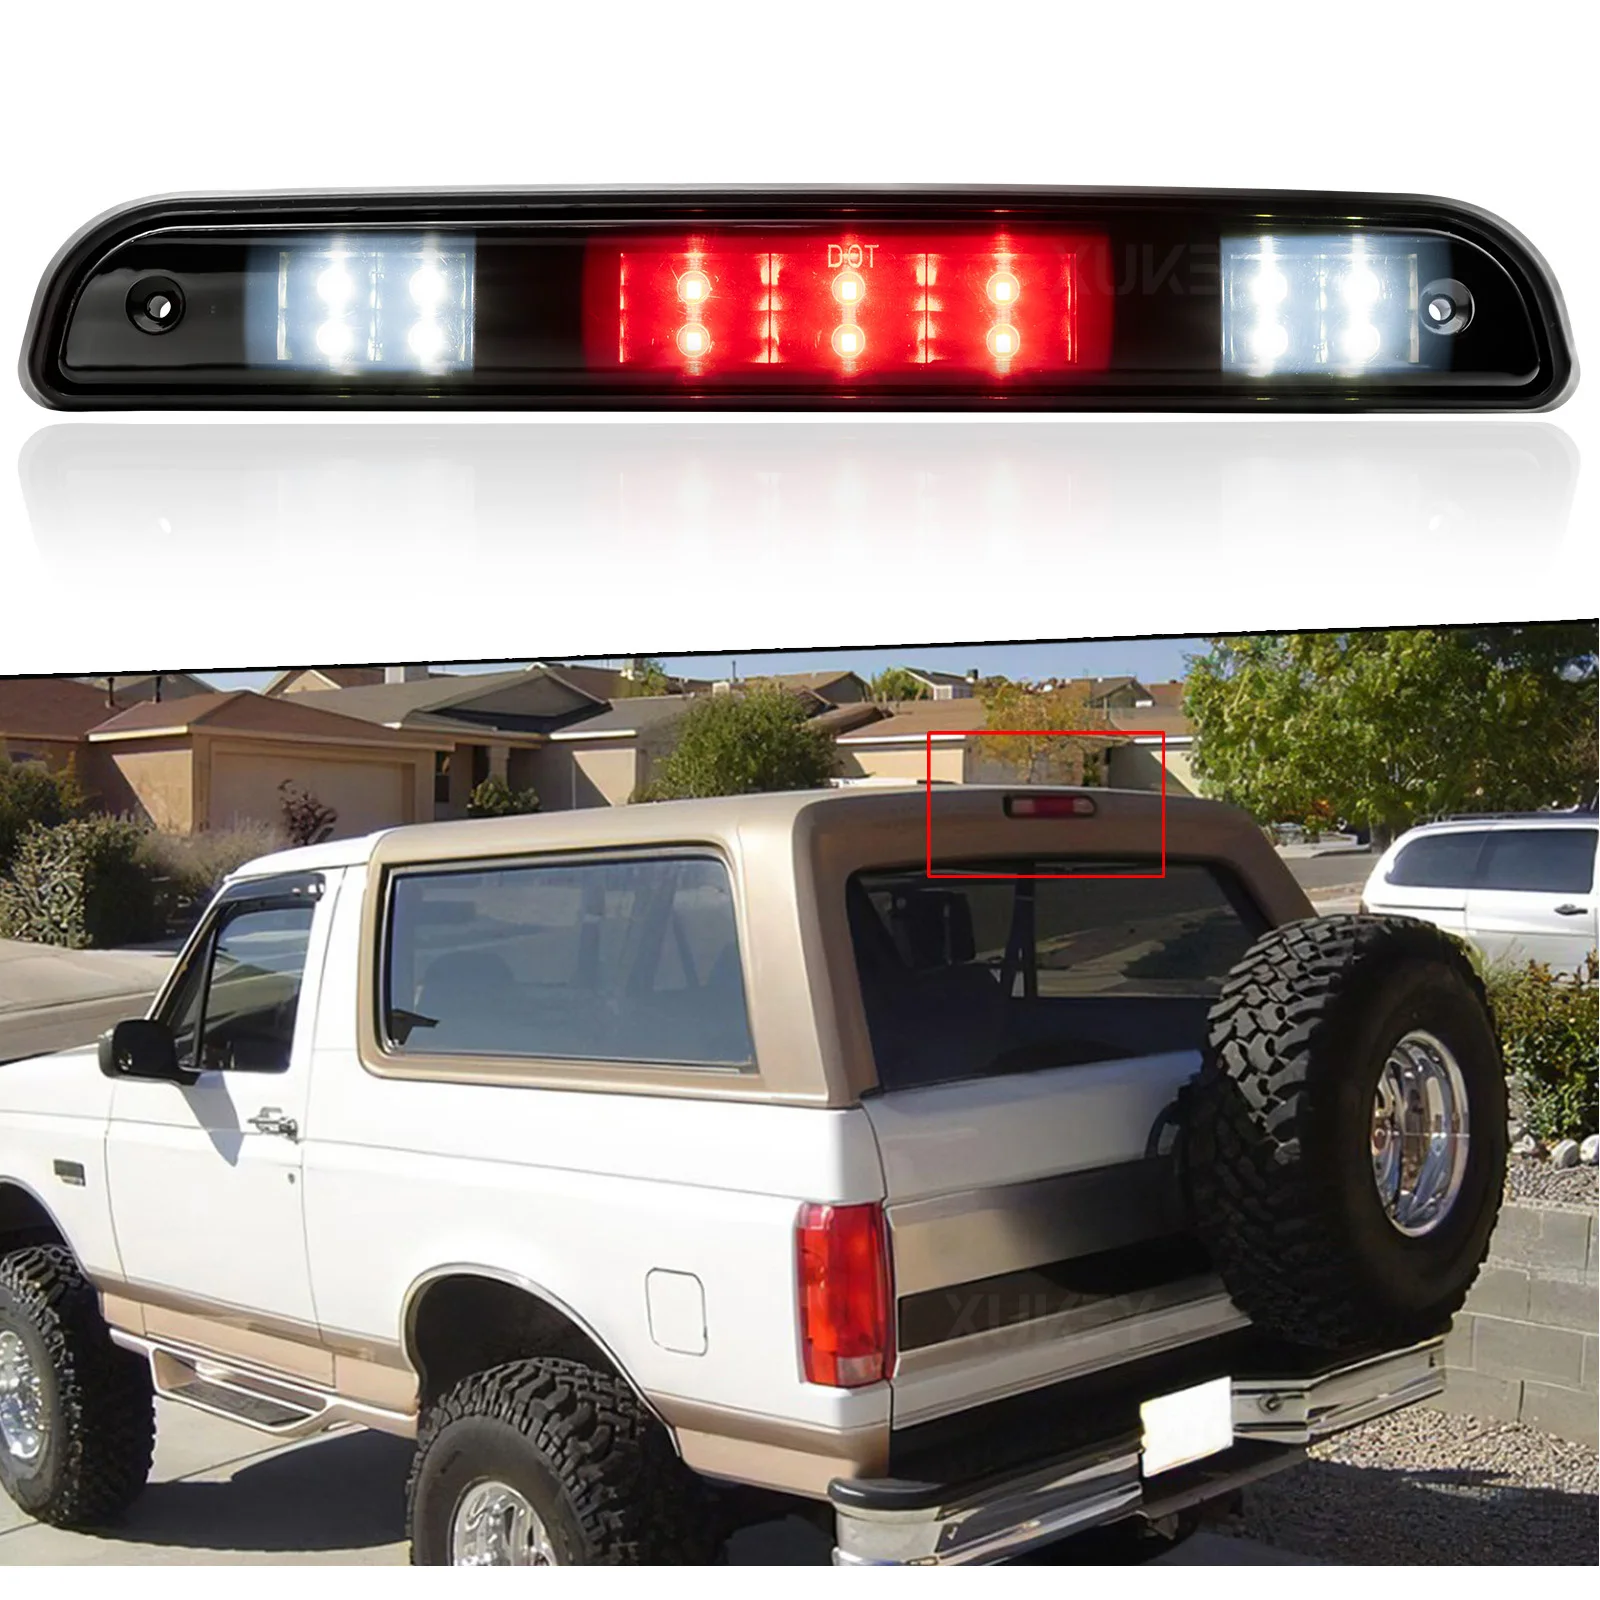 1x Smoked 3rd Third Brake Light For Ford F150 F250 F350 Bronco 1992-1996 Rear Tail High Mount Stop Led Waterproof Cargo Lamp